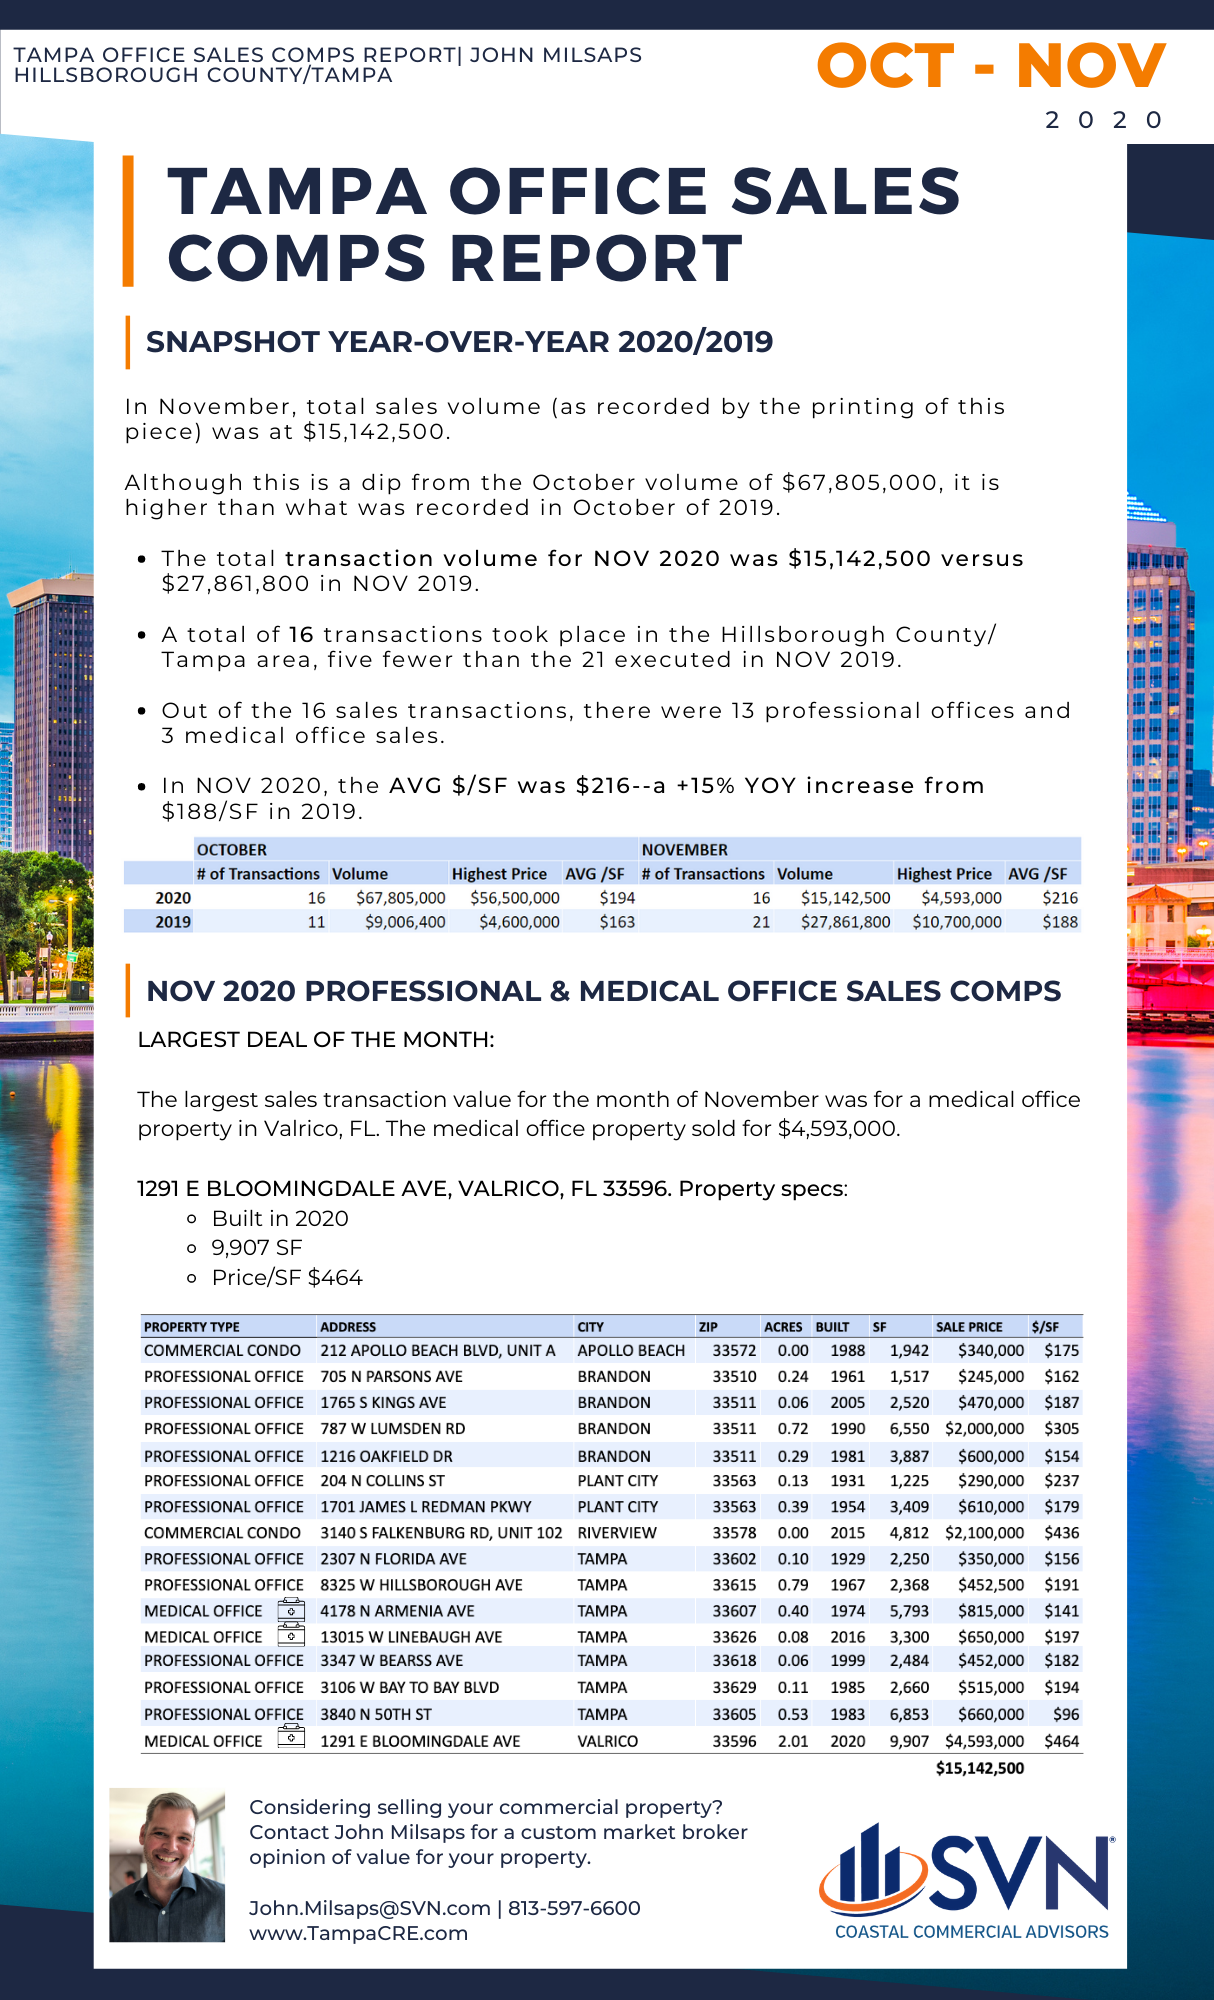 Tampa Office Sales Comps OCT - NOV 2020 by John Milsaps